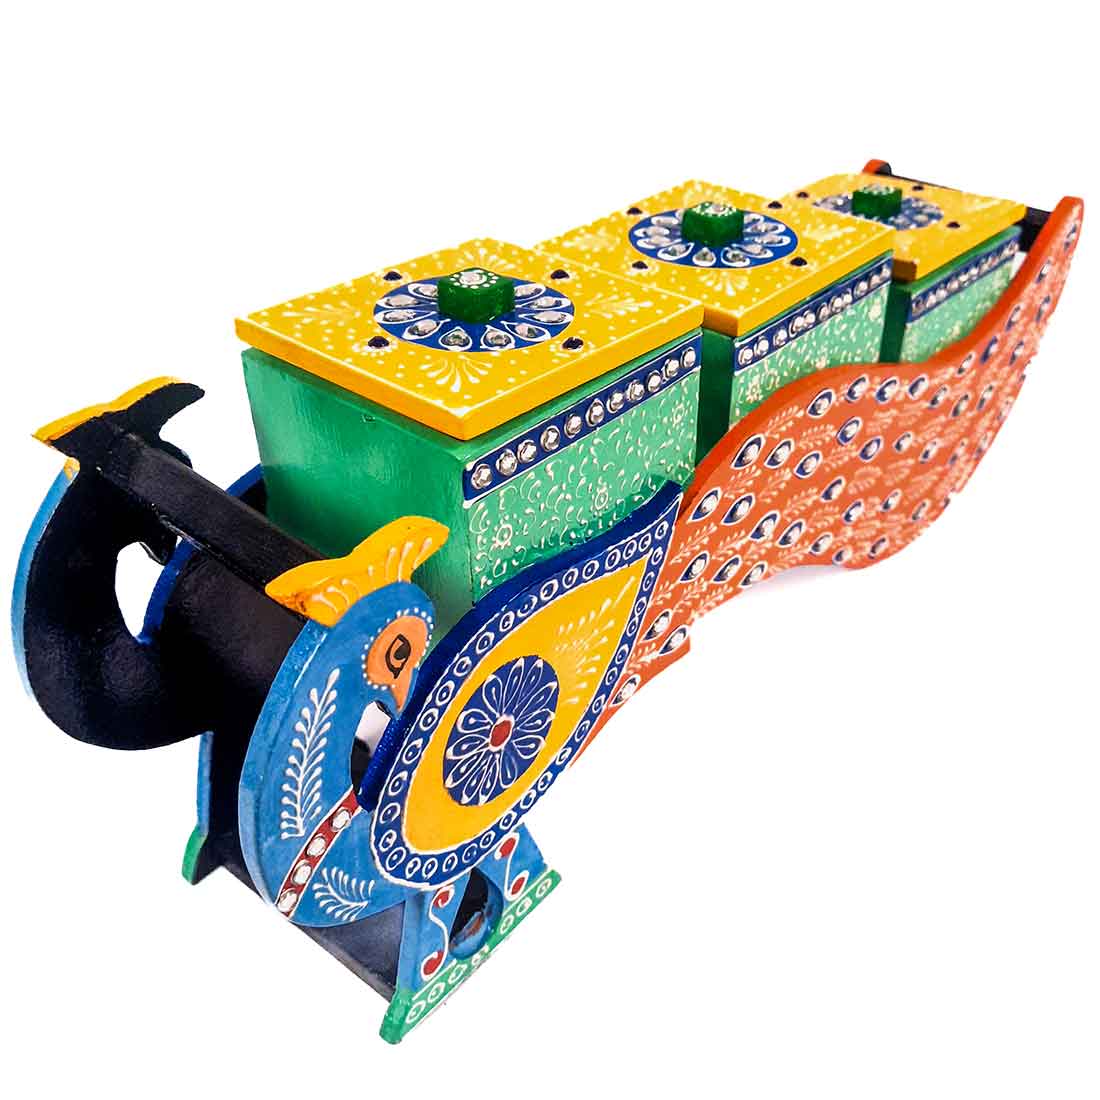 Dry Fruit Box with Lid  - Peacock Design - For Serving & Dining Table Decor - ApkaMart